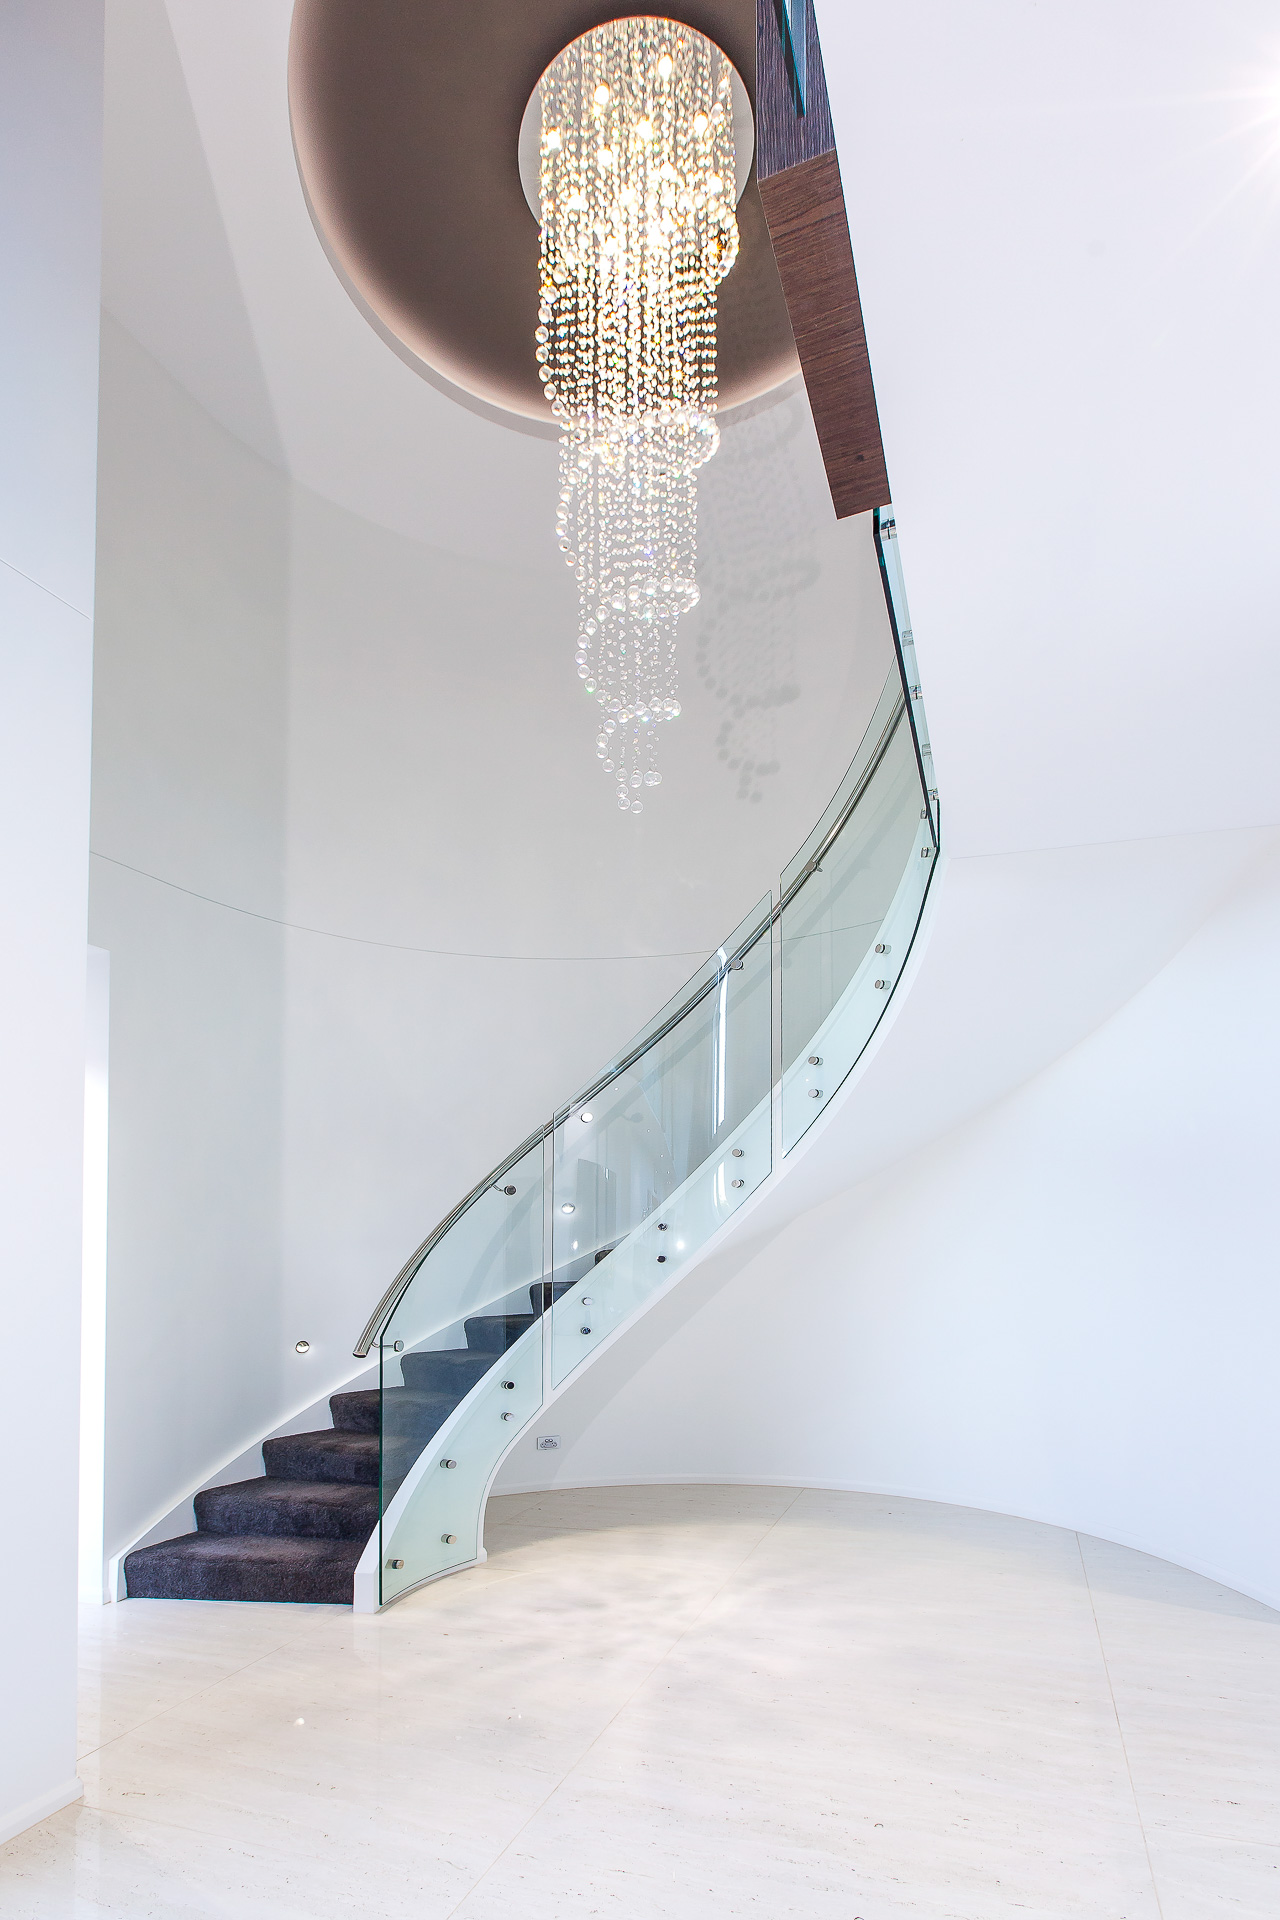 Luxury home, spiral staircase, stairs, chandelier, spiral lights, curved glass, stunning entry, minka joinery